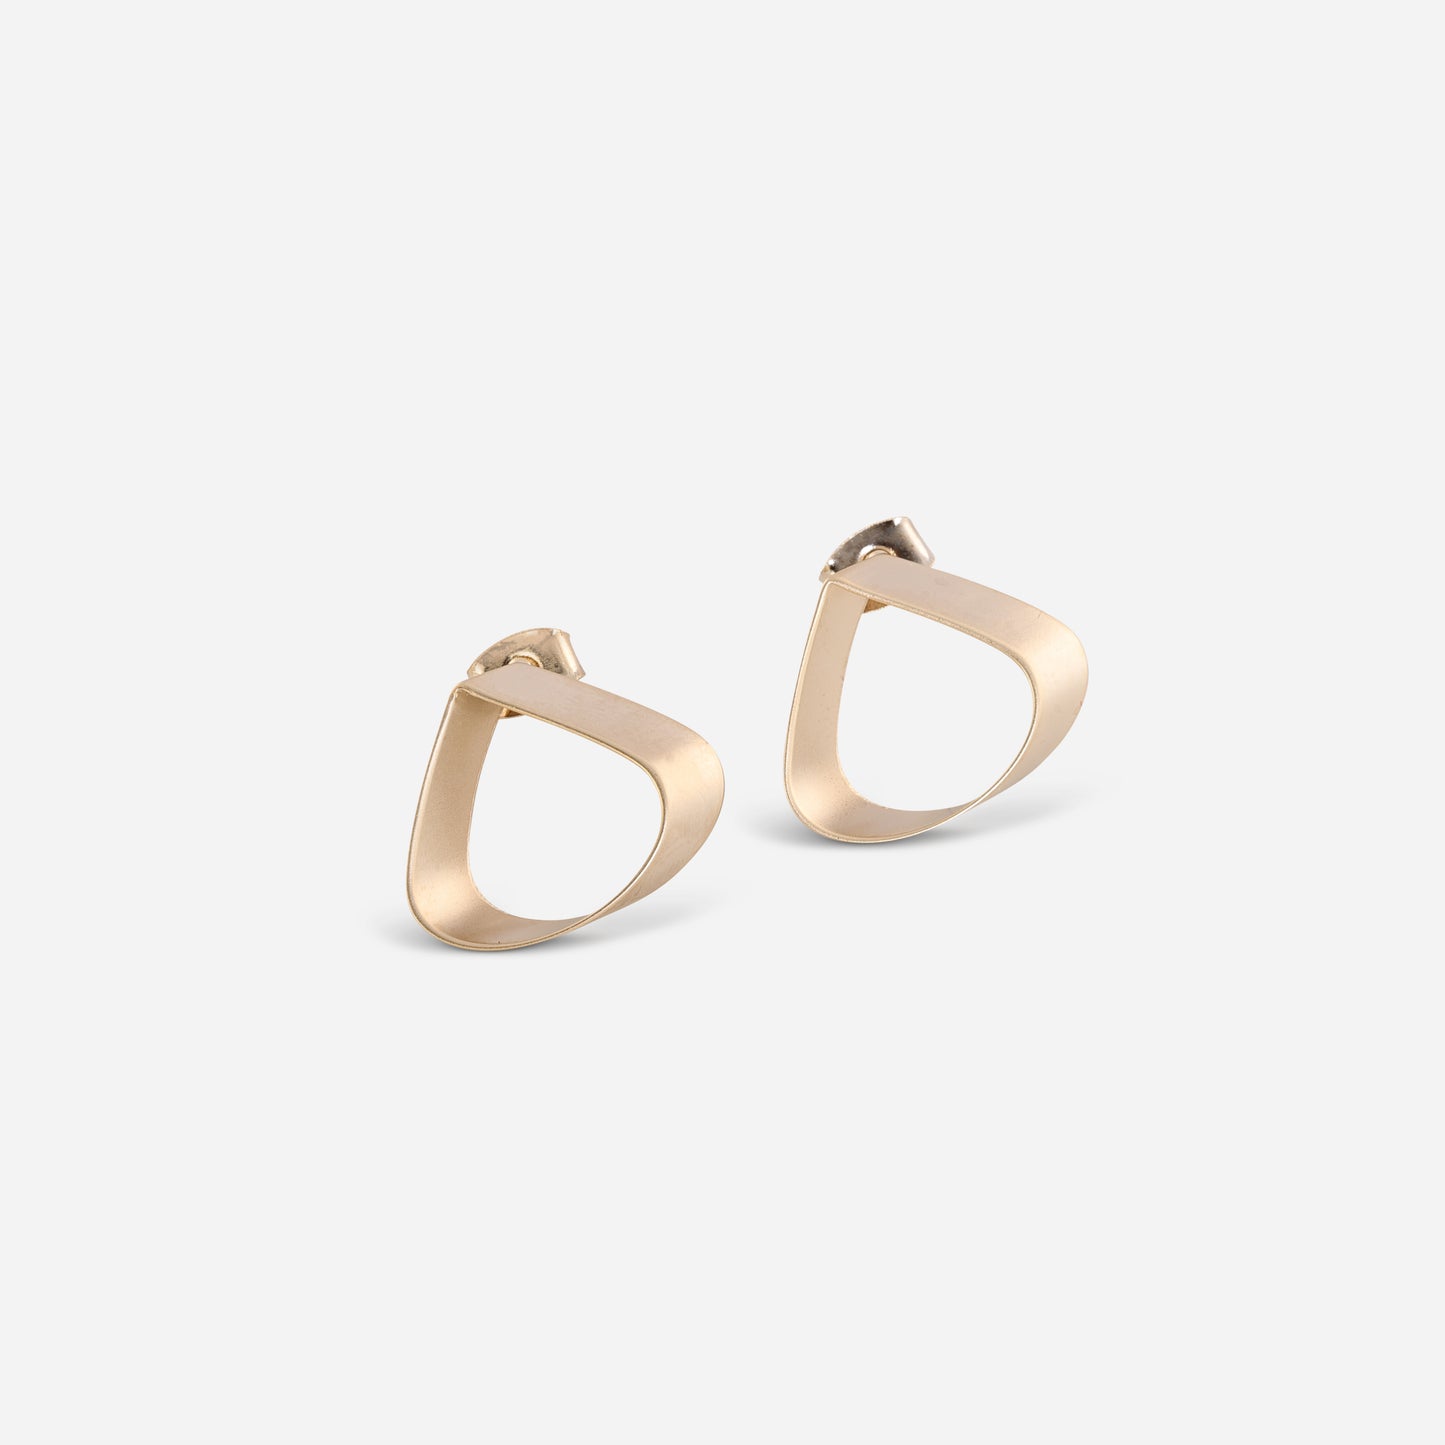 Triangle stud earrings in matte gold can be a stylish and modern choice.